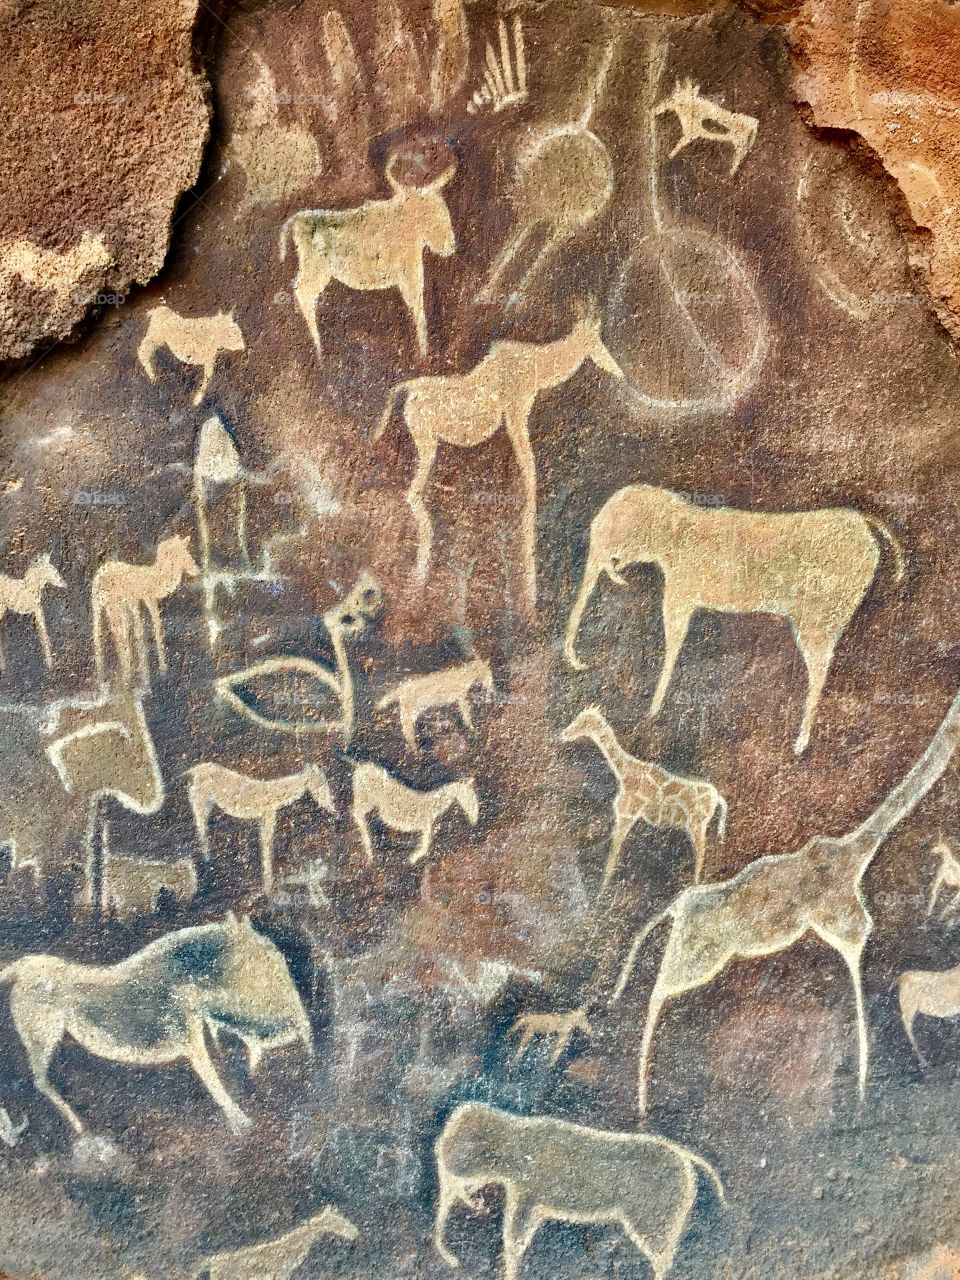 Simulated Cave Painting